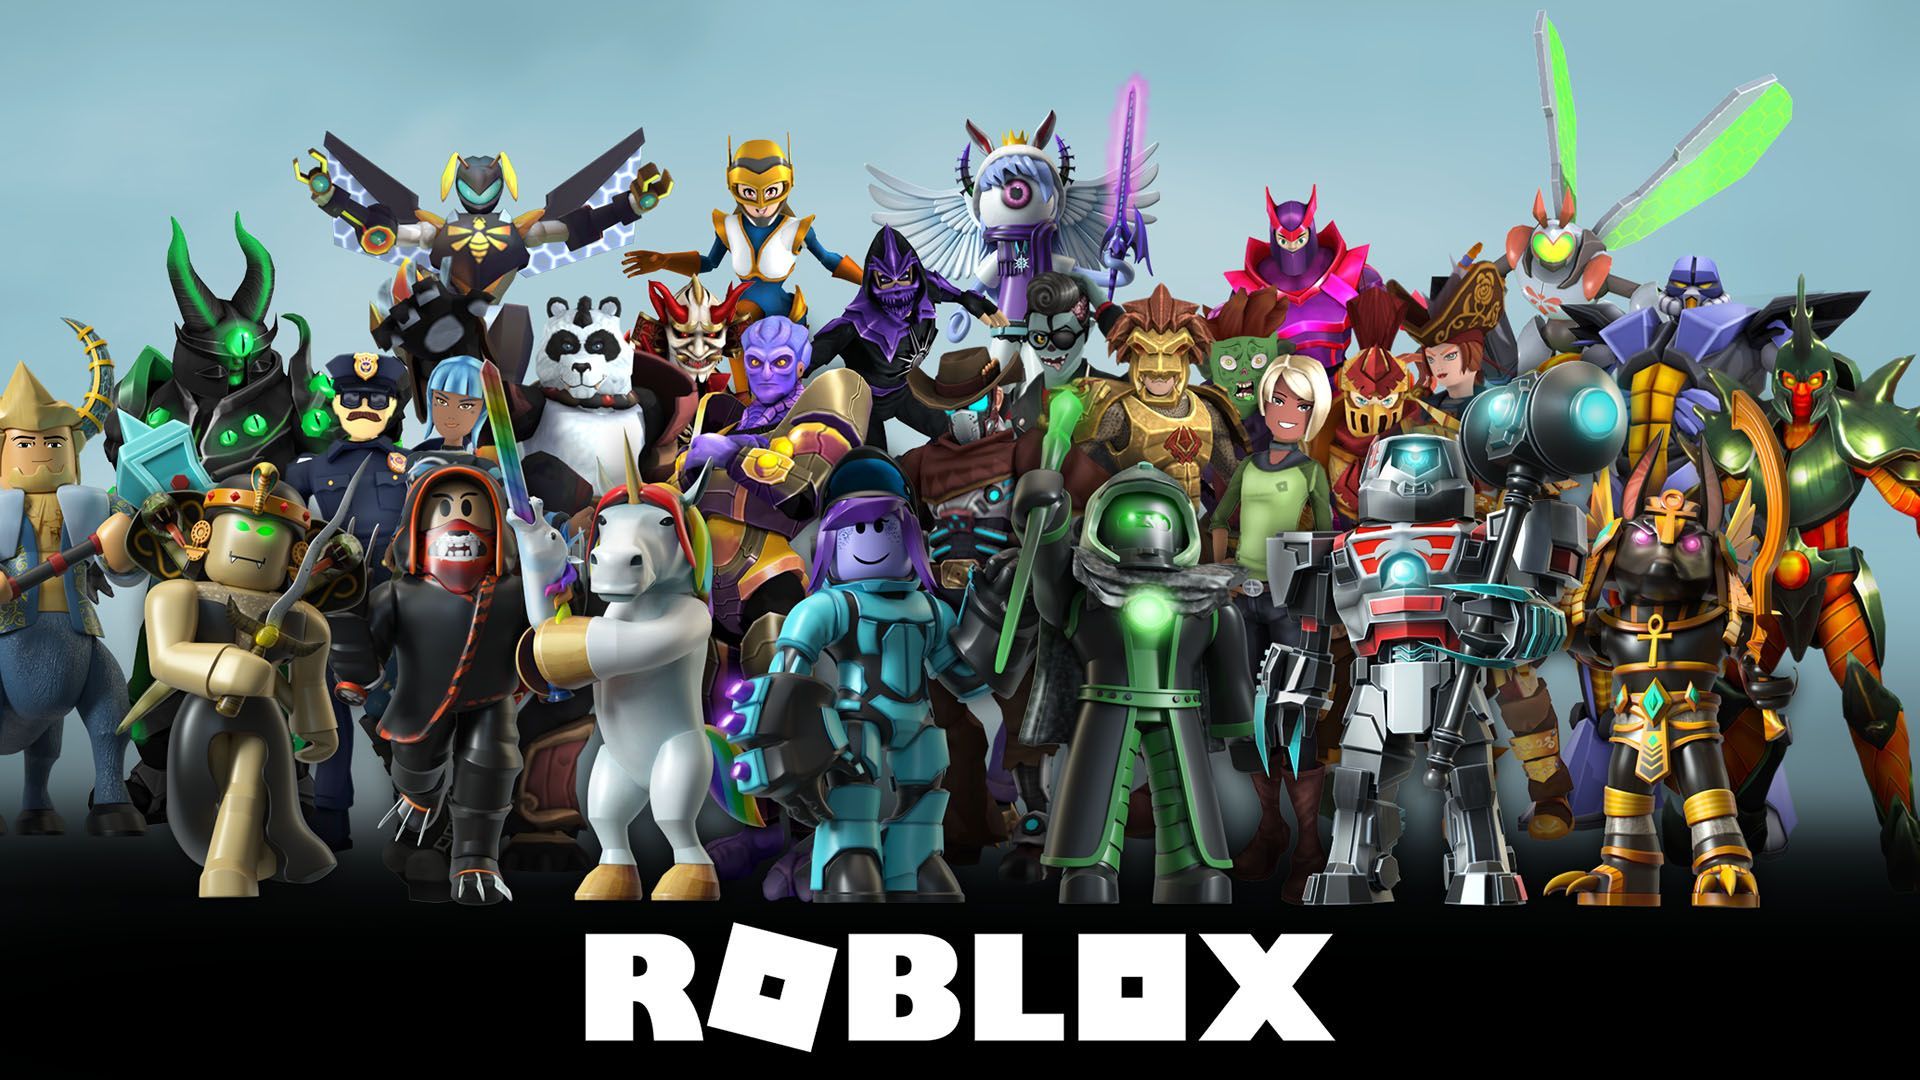 X 上的TC builds：「Another simple wallpaper for roblox players #robloxart # Roblox #wallpaper  / X